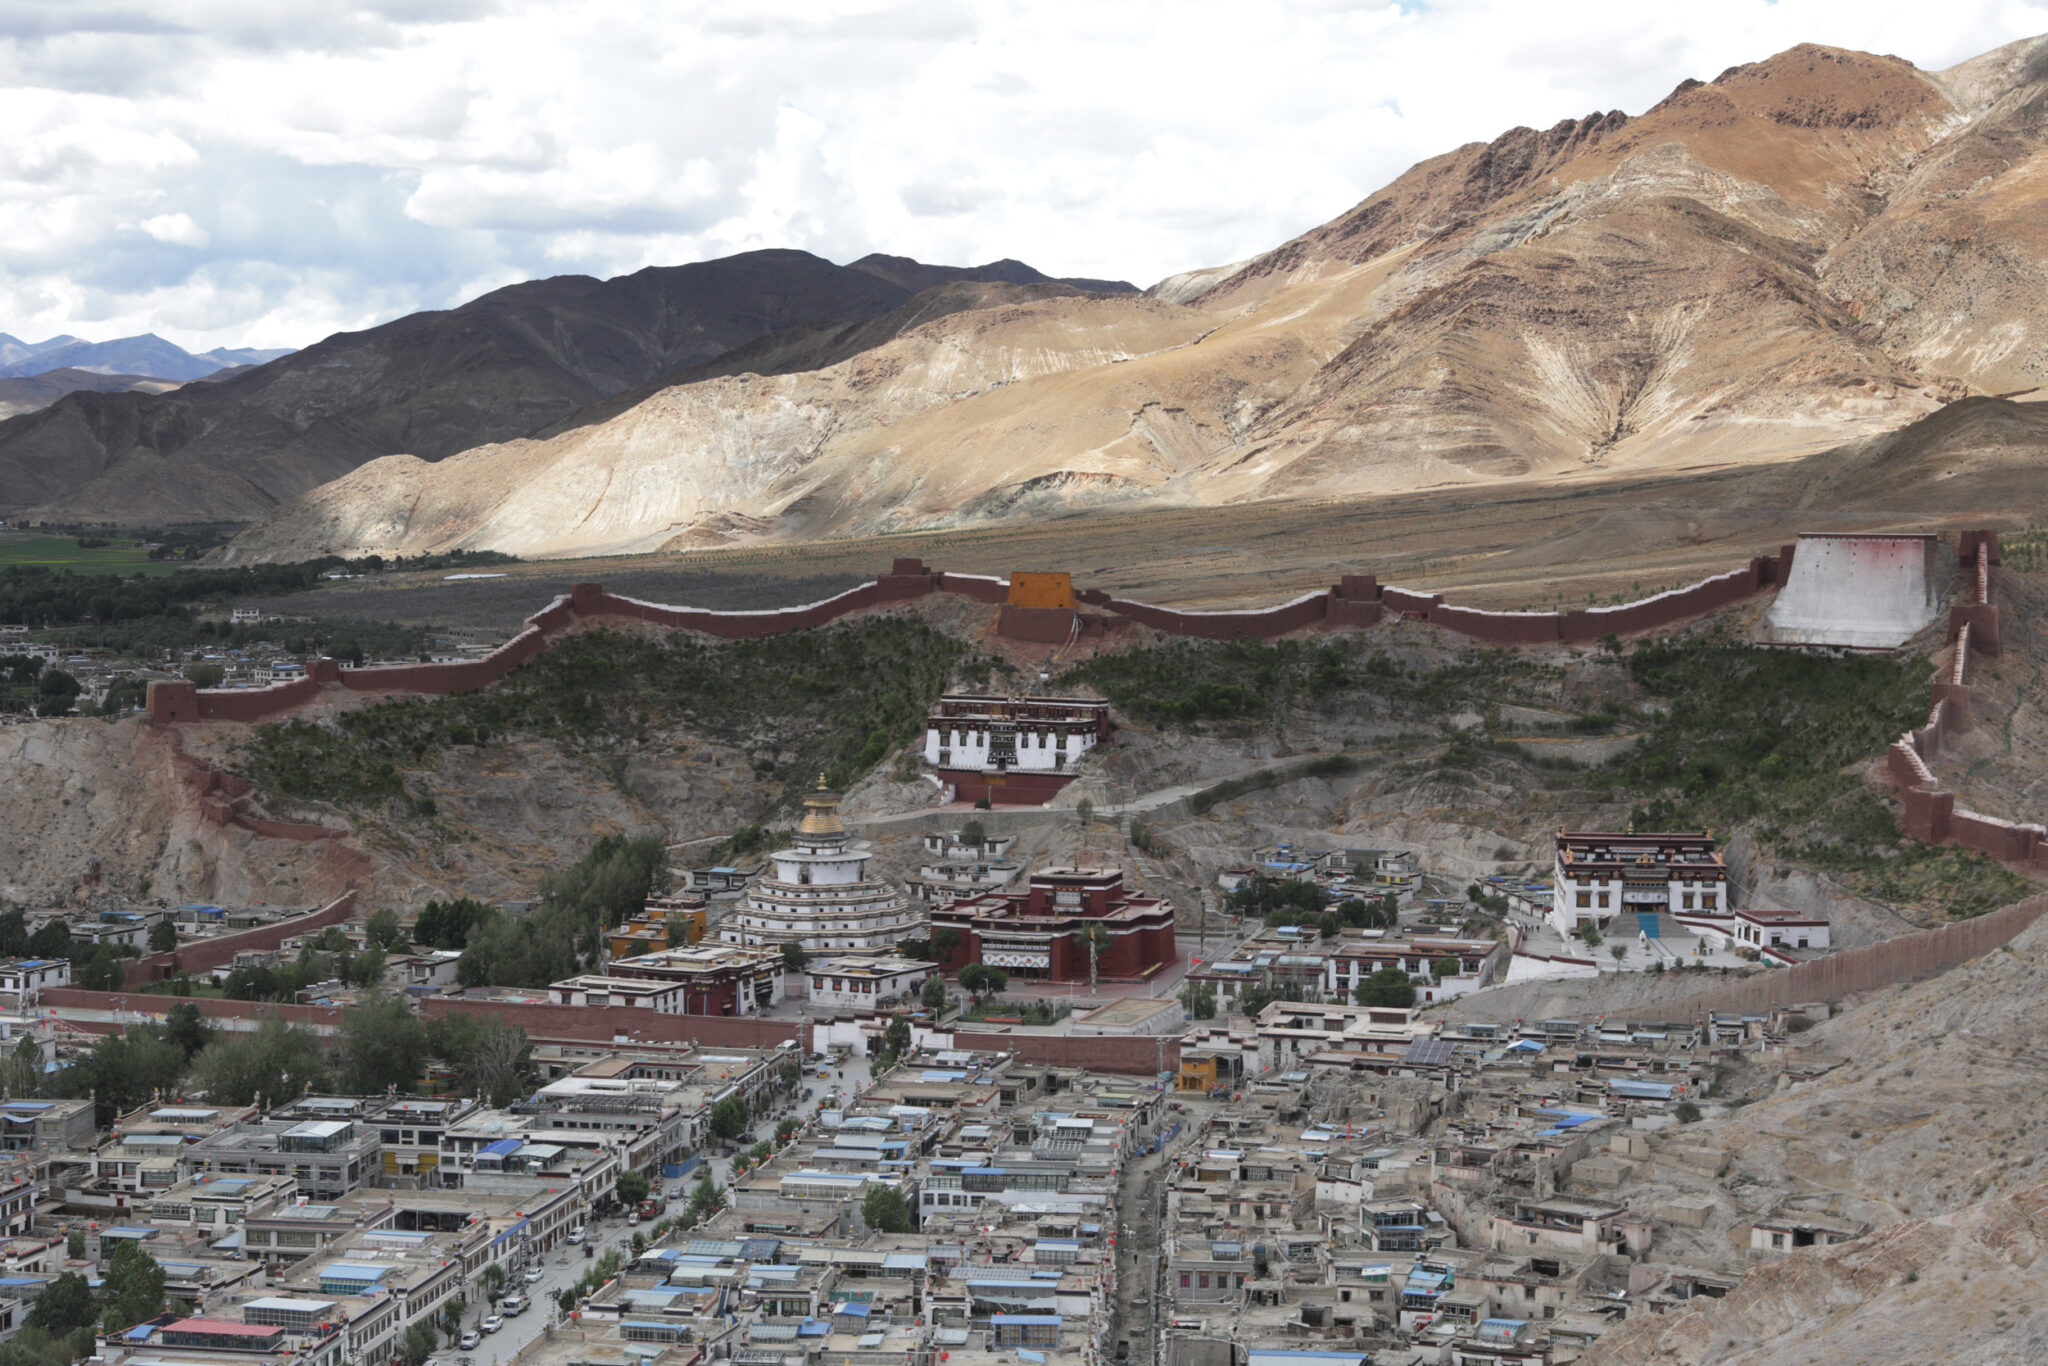 Aerial view of village dominated by religious complex surrounded by red wall situated in mountain valley